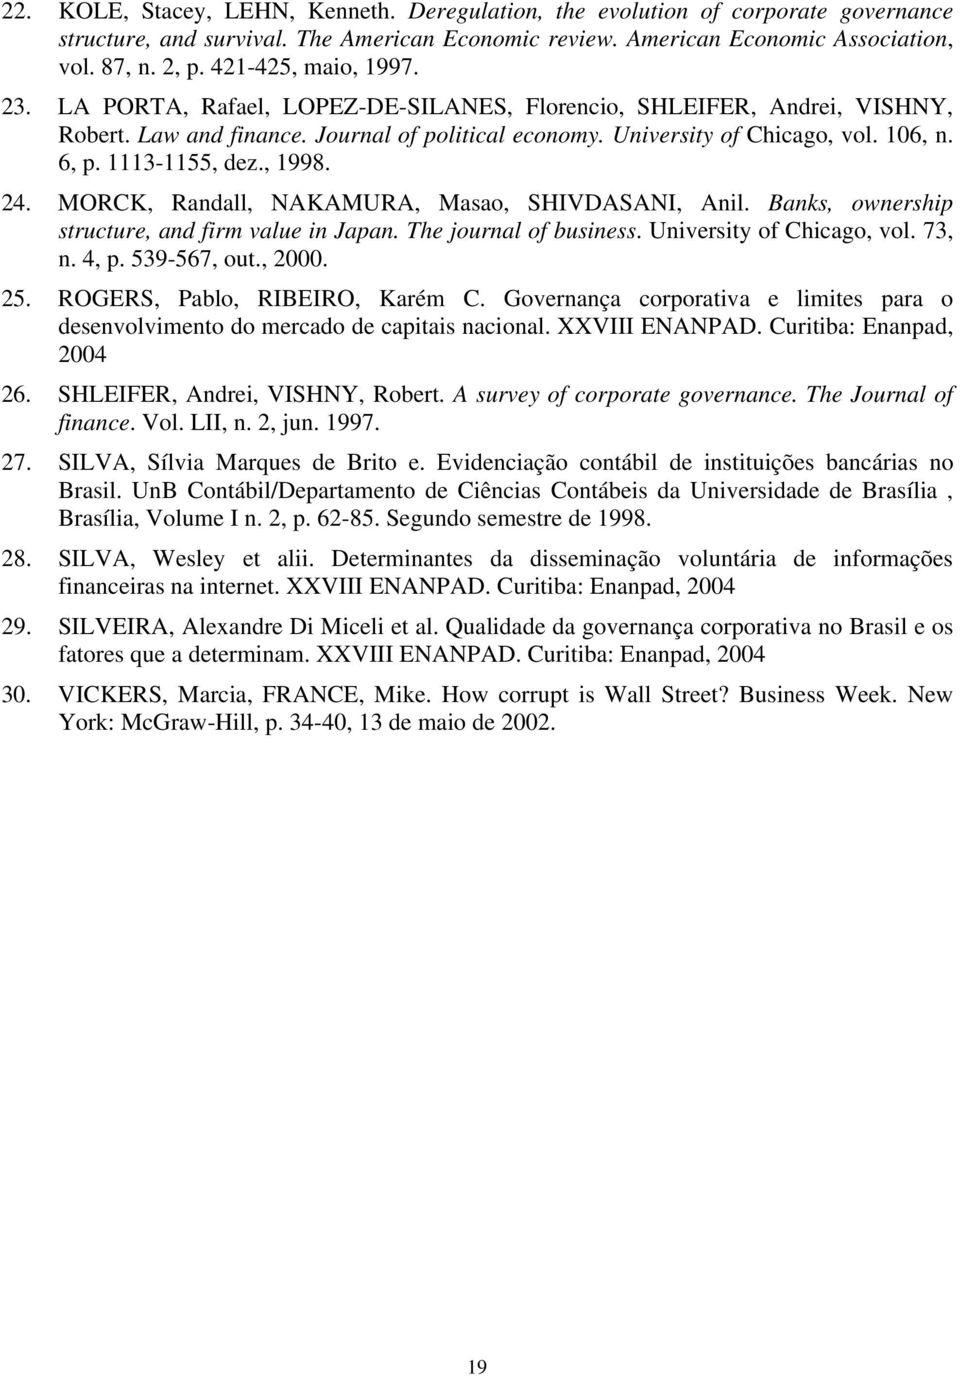 1113-1155, dez., 1998. 24. MORCK, Randall, NAKAMURA, Masao, SHIVDASANI, Anil. Banks, ownership structure, and firm value in Japan. The journal of business. University of Chicago, vol. 73, n. 4, p.